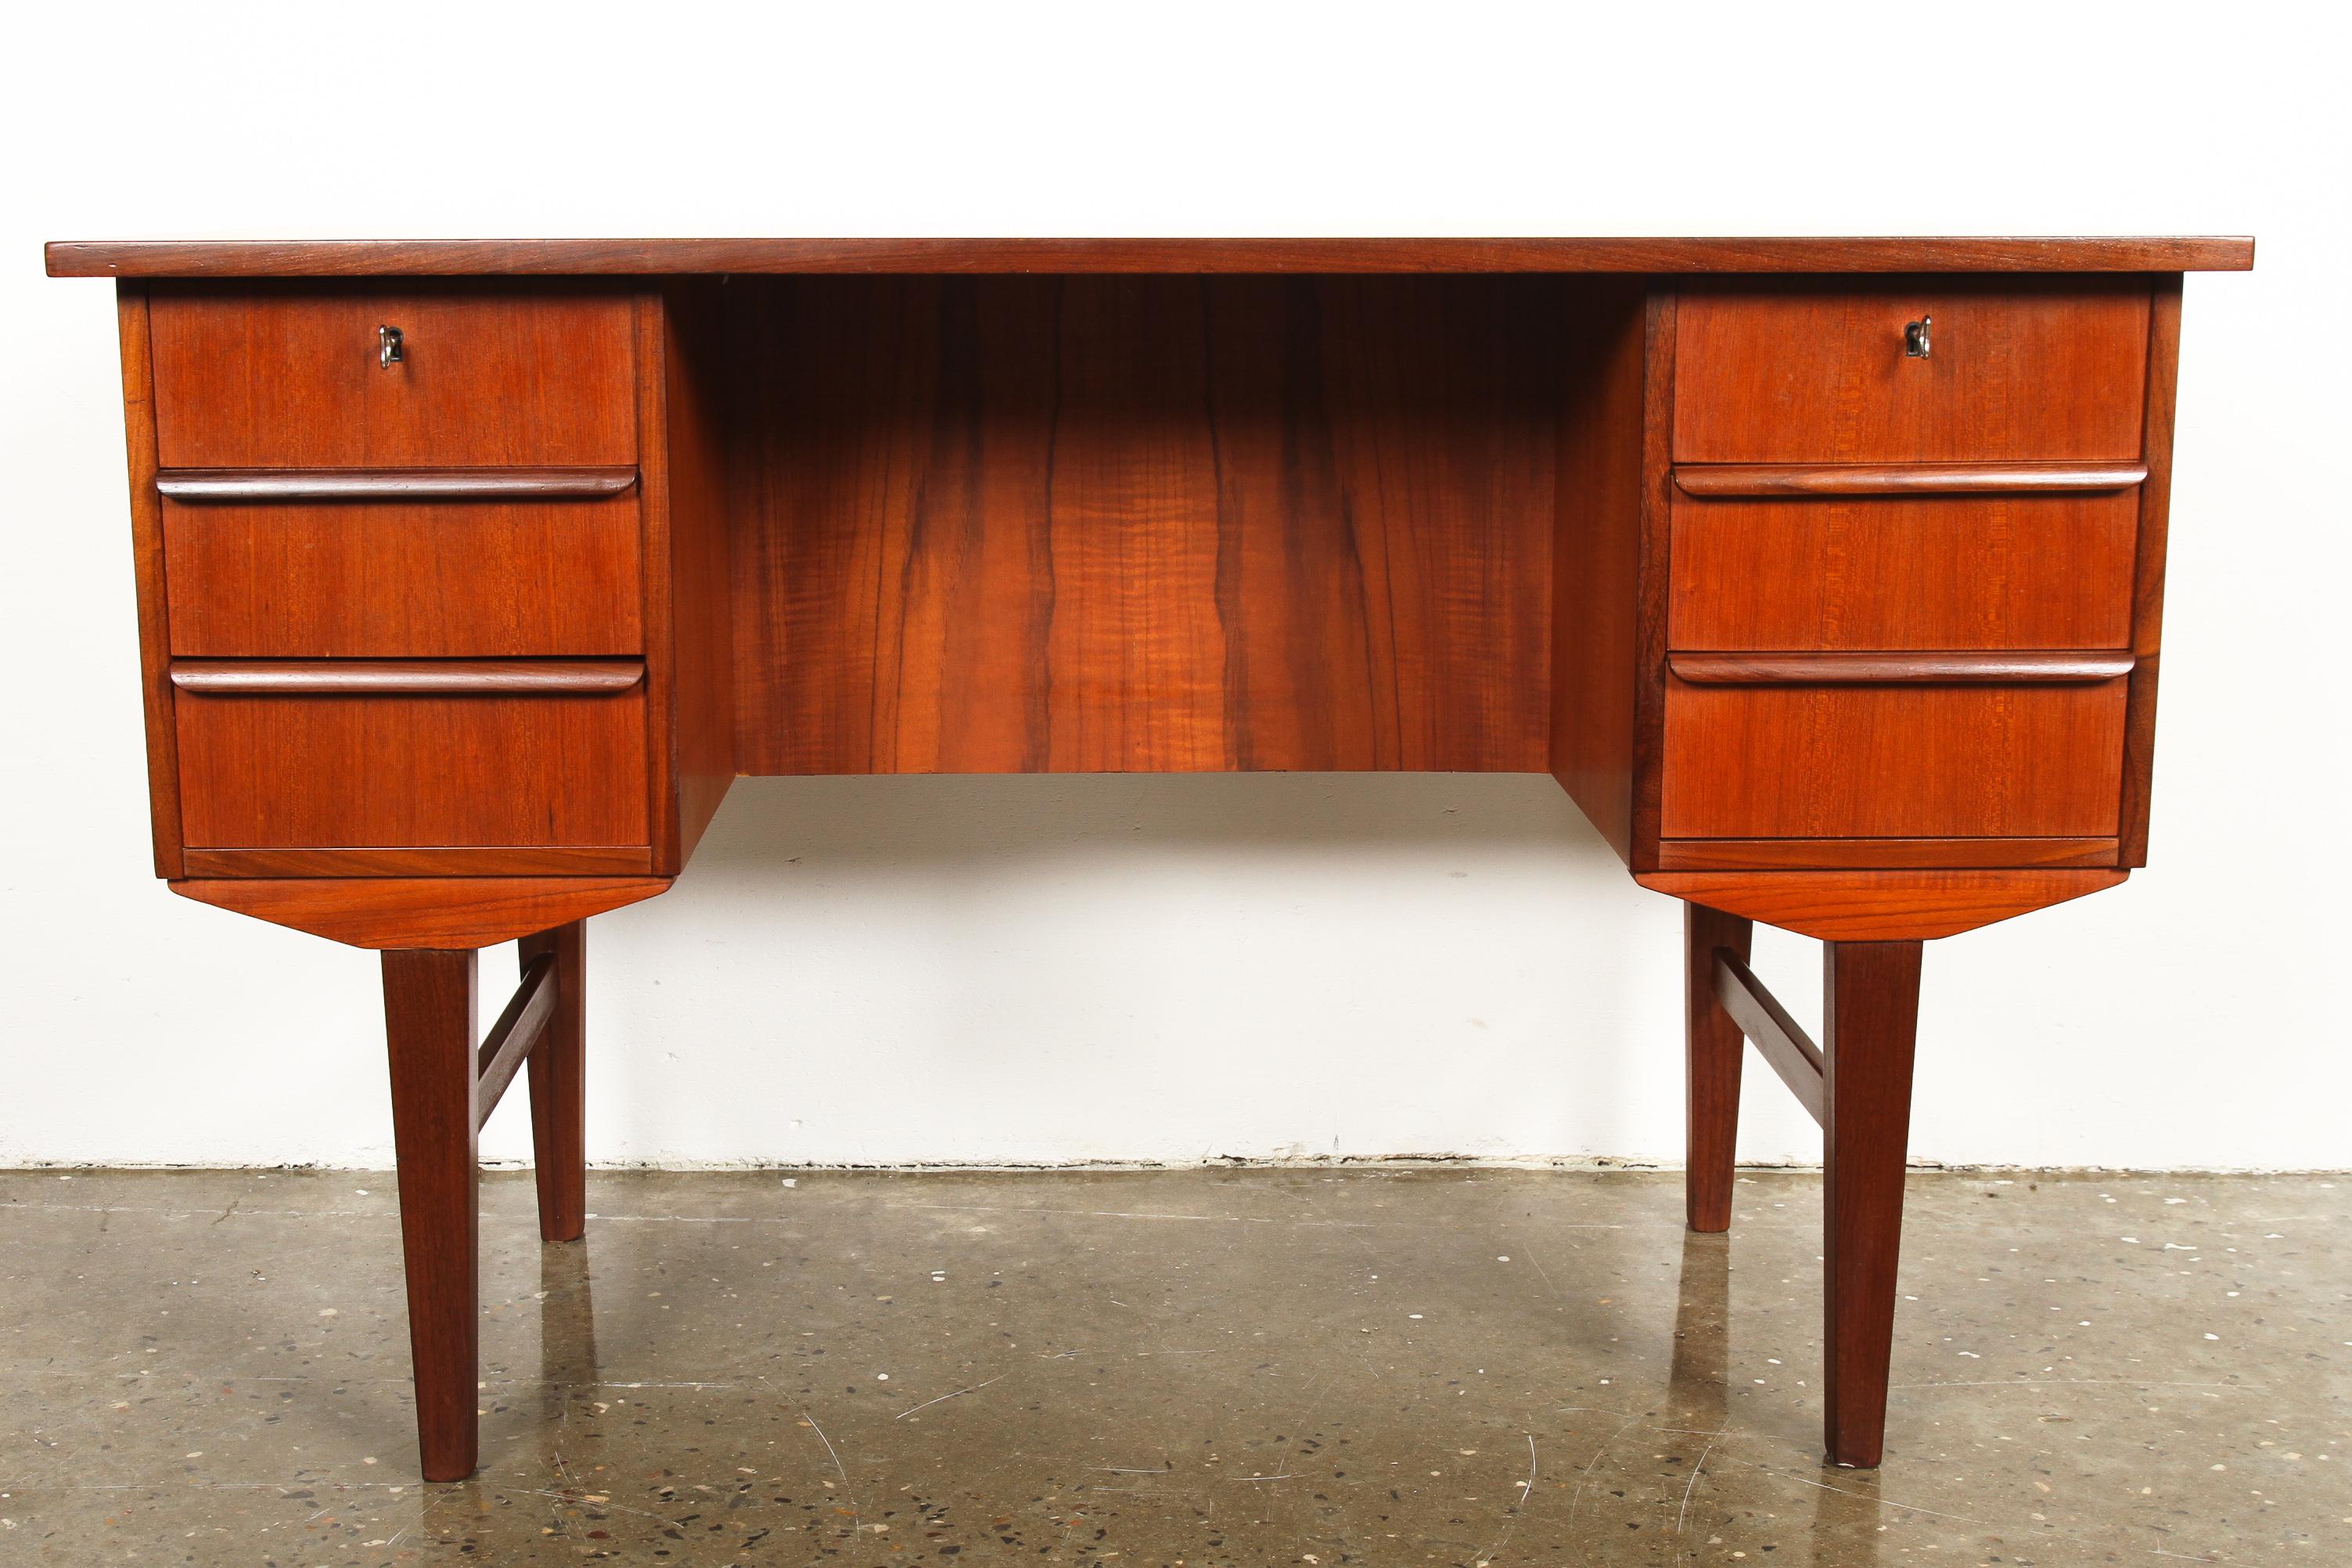 Lovely Danish Mid-Century Modern freestanding teak writing desk. If features six drawers in front, and two book shelves on the back. Two top drawers comes with a key each. Tabletop has been refinished, and treated with teak oil and wax for extra